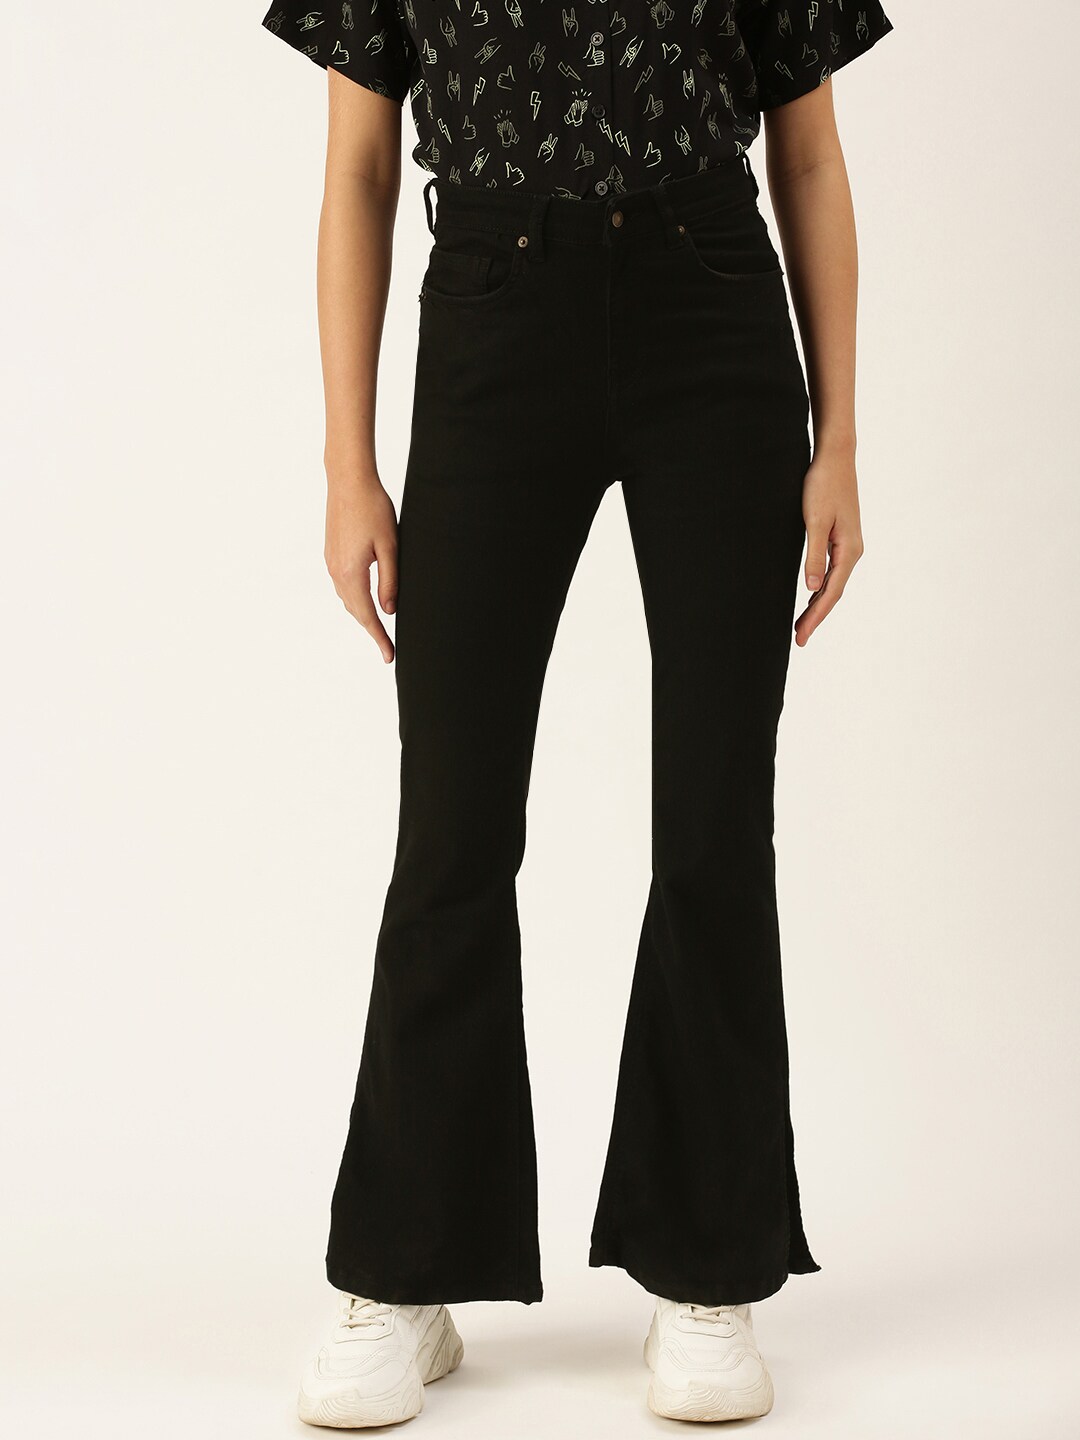 FOREVER 21 Women Black Skinny Fit Stretchable Jeans Price in India